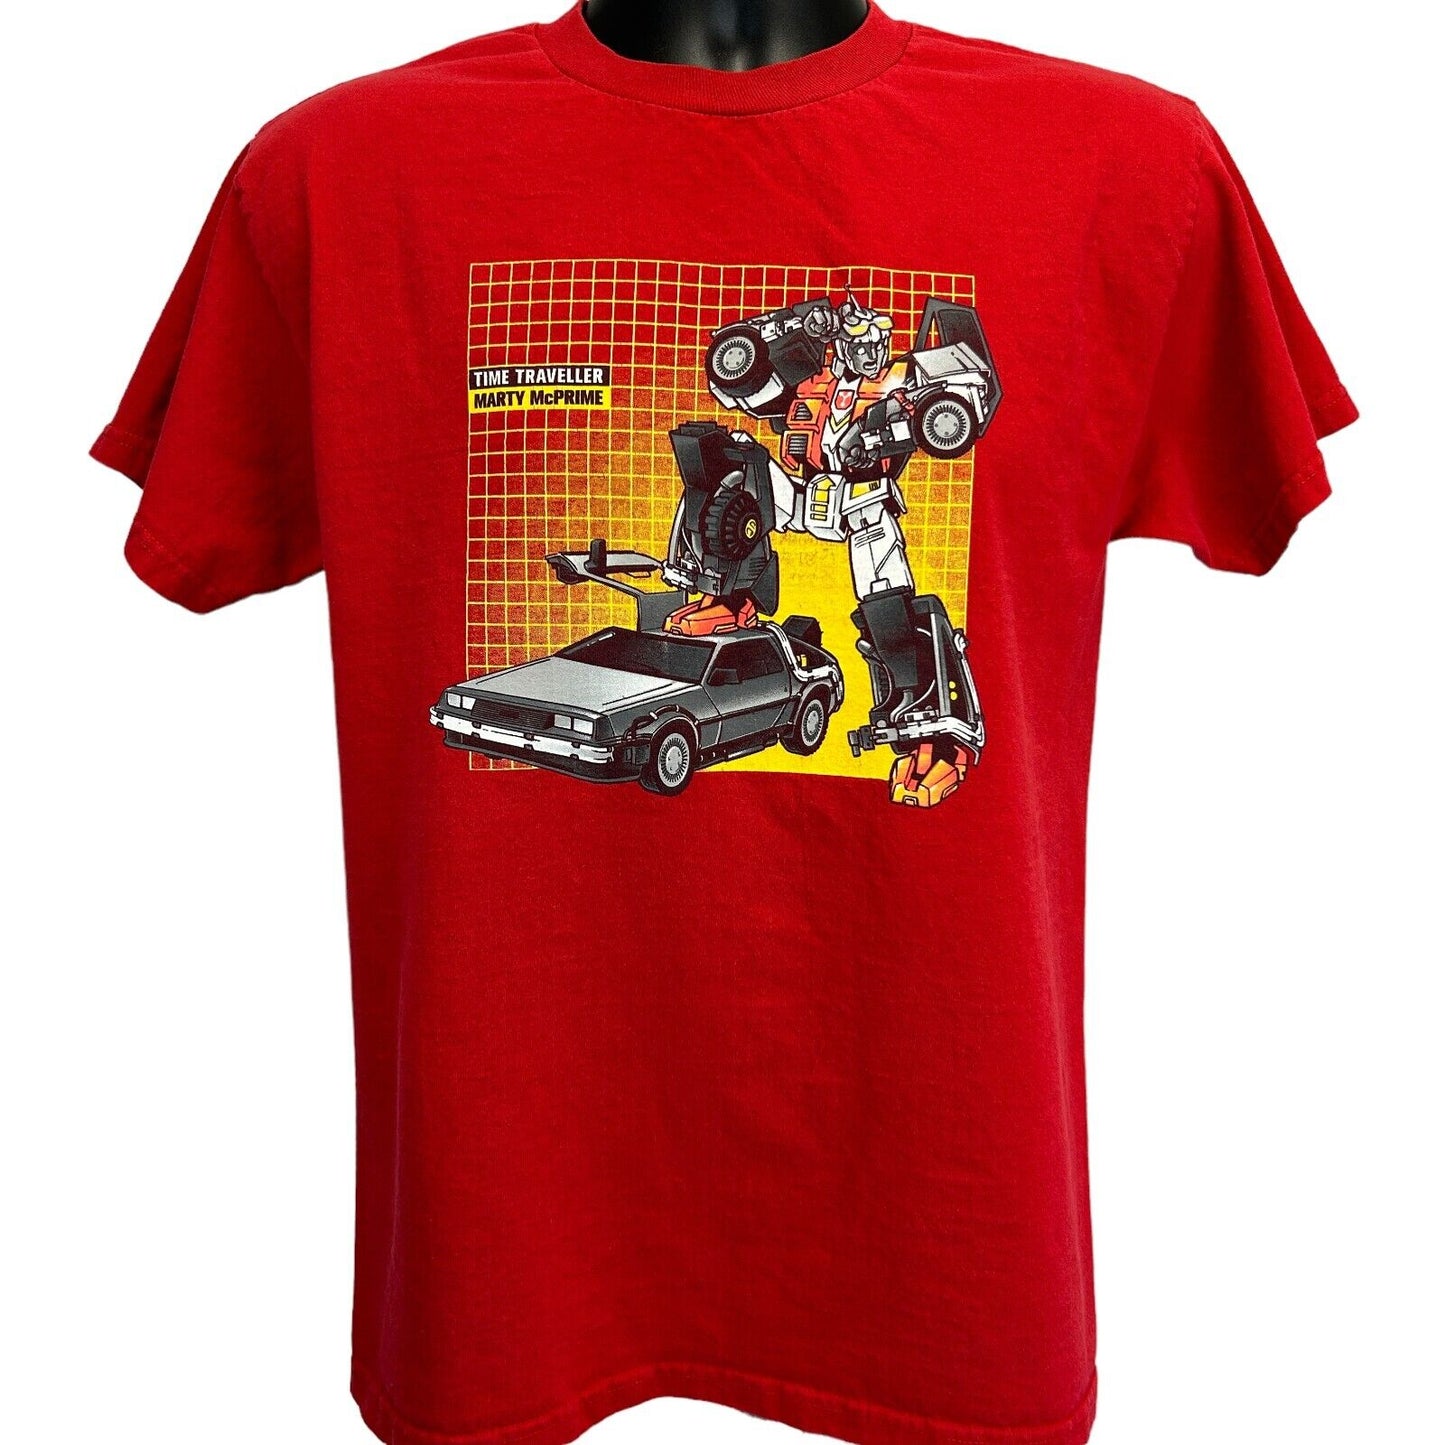 Marty McPrime Transformers T Shirt Back To The Future DeLorean Red Tee Medium